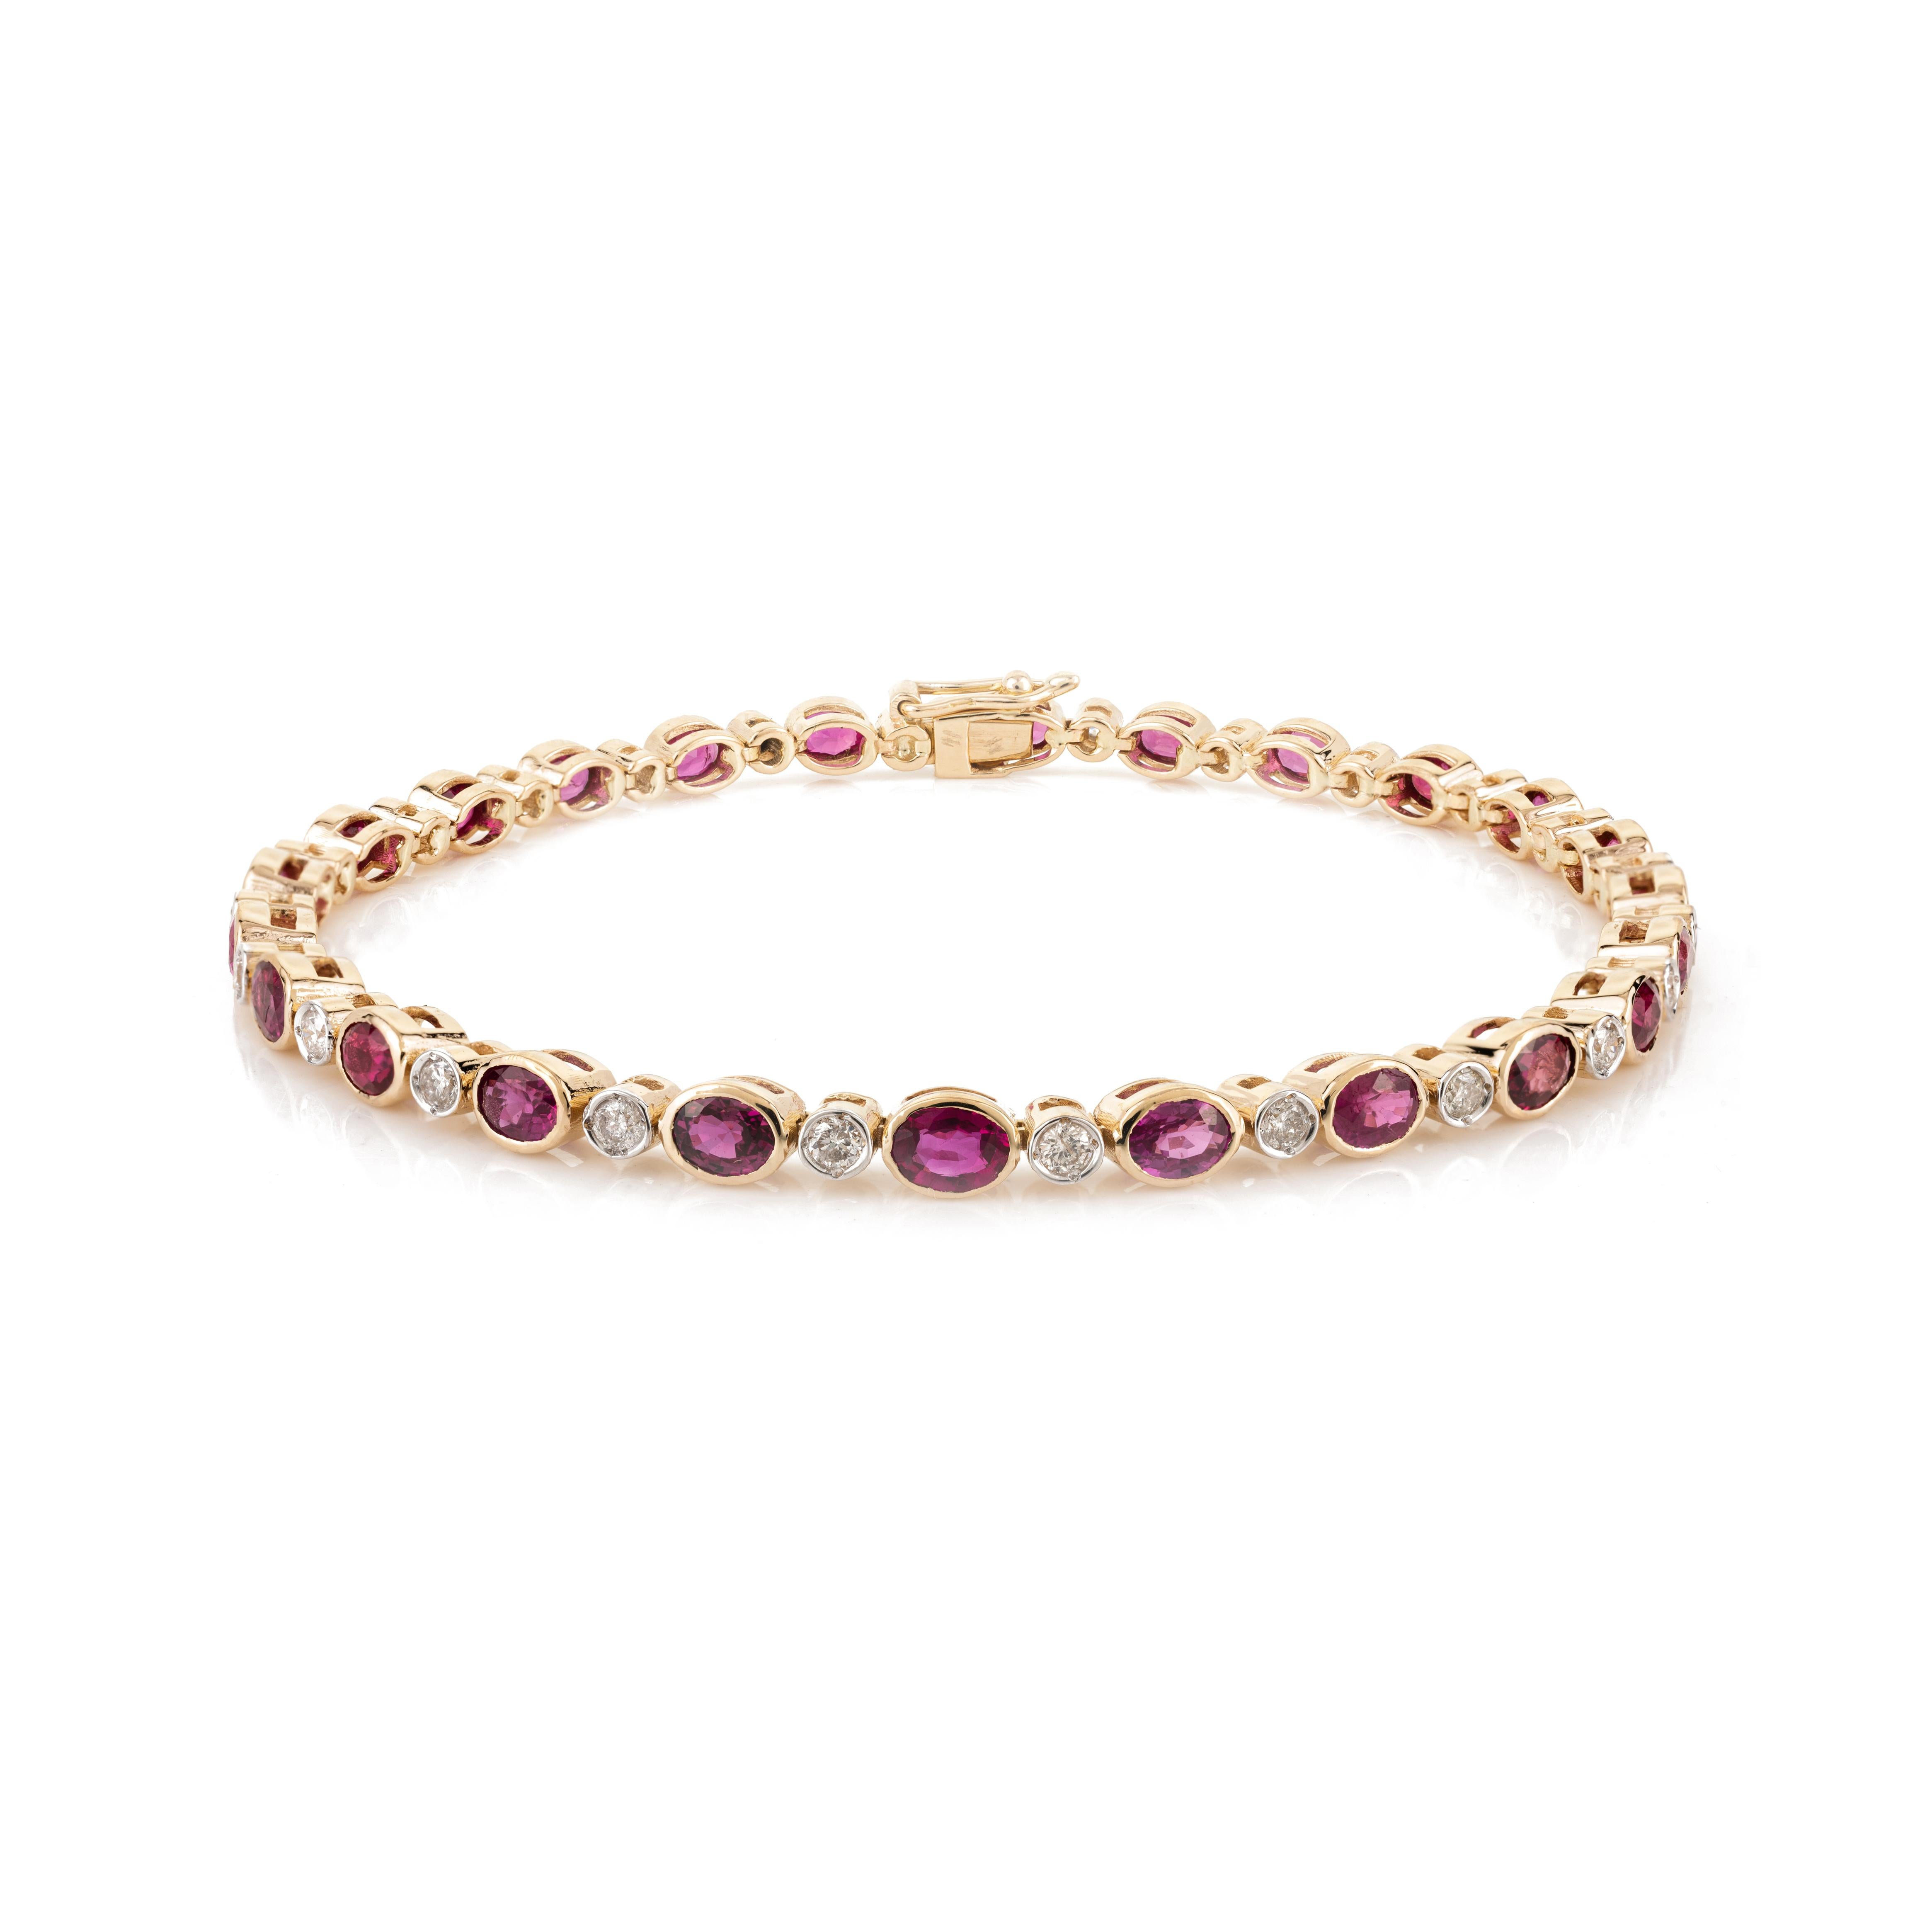 Women's 4.9 Carat Faceted Ruby Diamond Tennis Bracelet in 18k Solid Yellow Gold For Sale